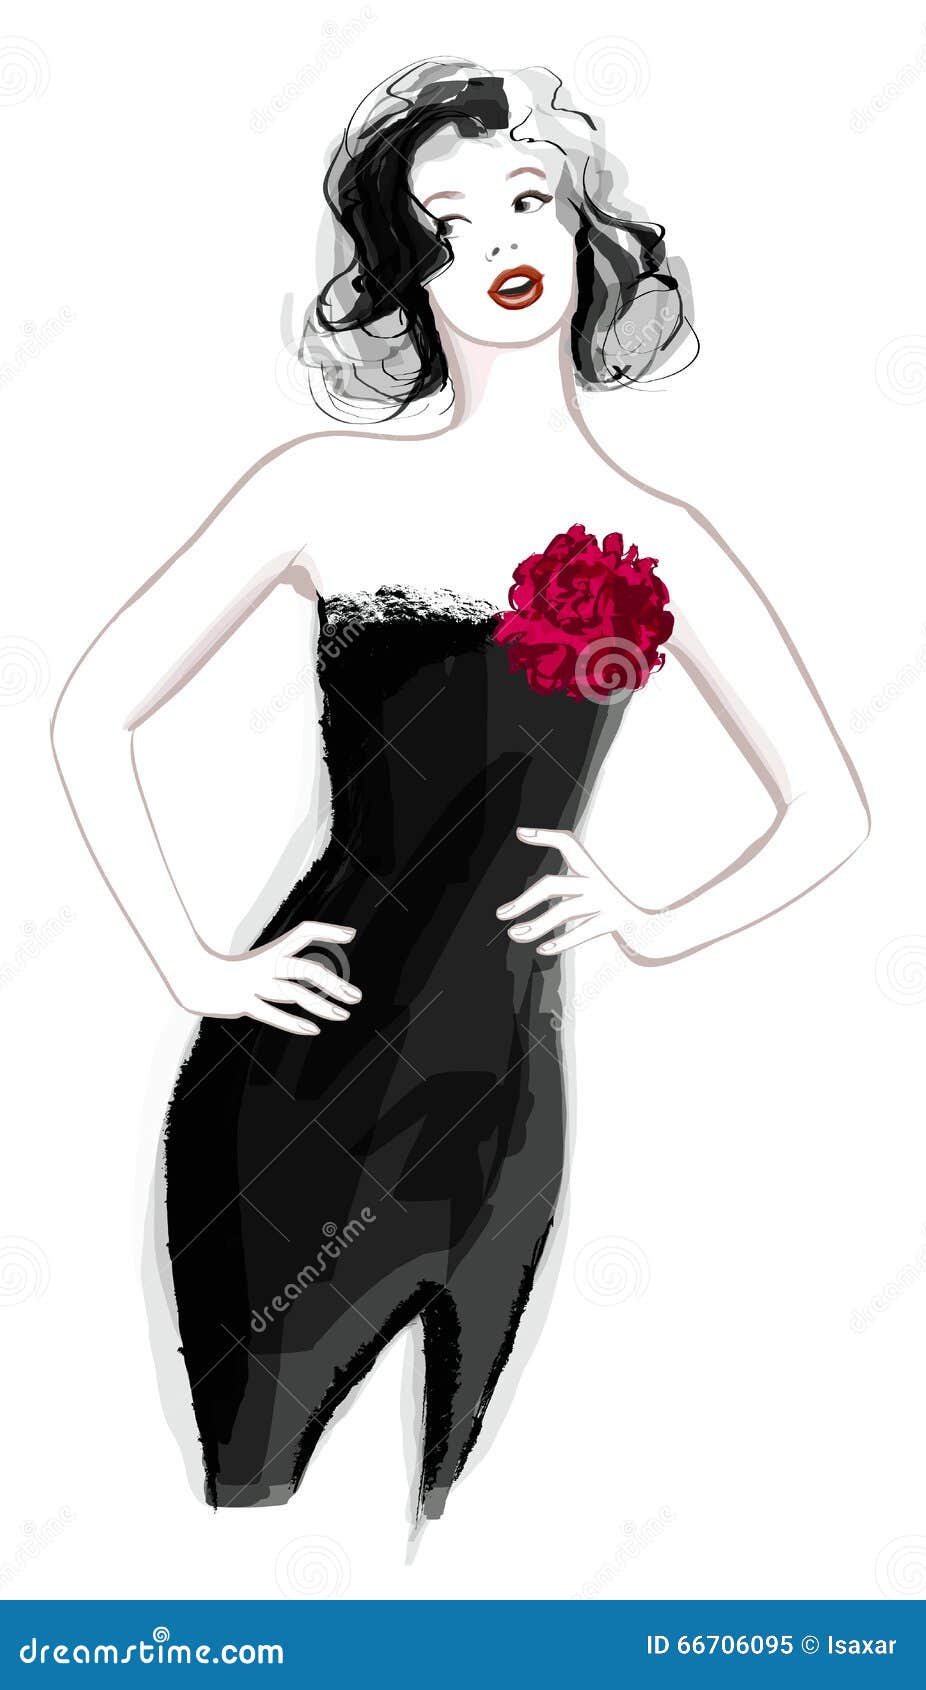 Woman in black dress stock vector. Illustration of lady - 66706095